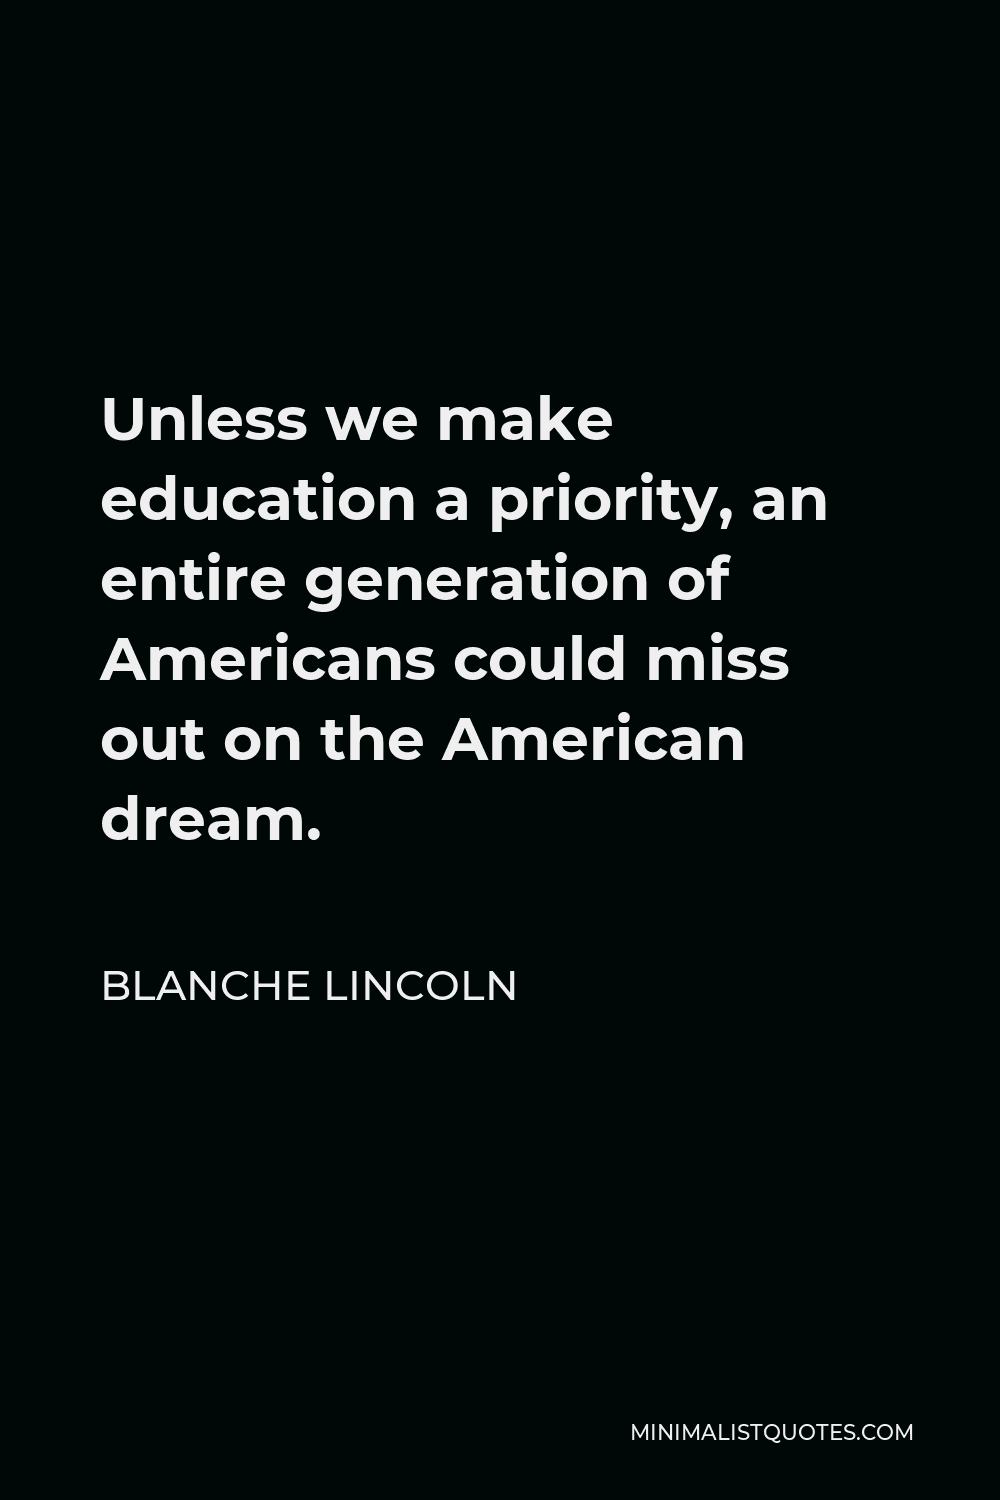 Blanche Lincoln Quote - Unless we make education a priority, an entire generation of Americans could miss out on the American dream.